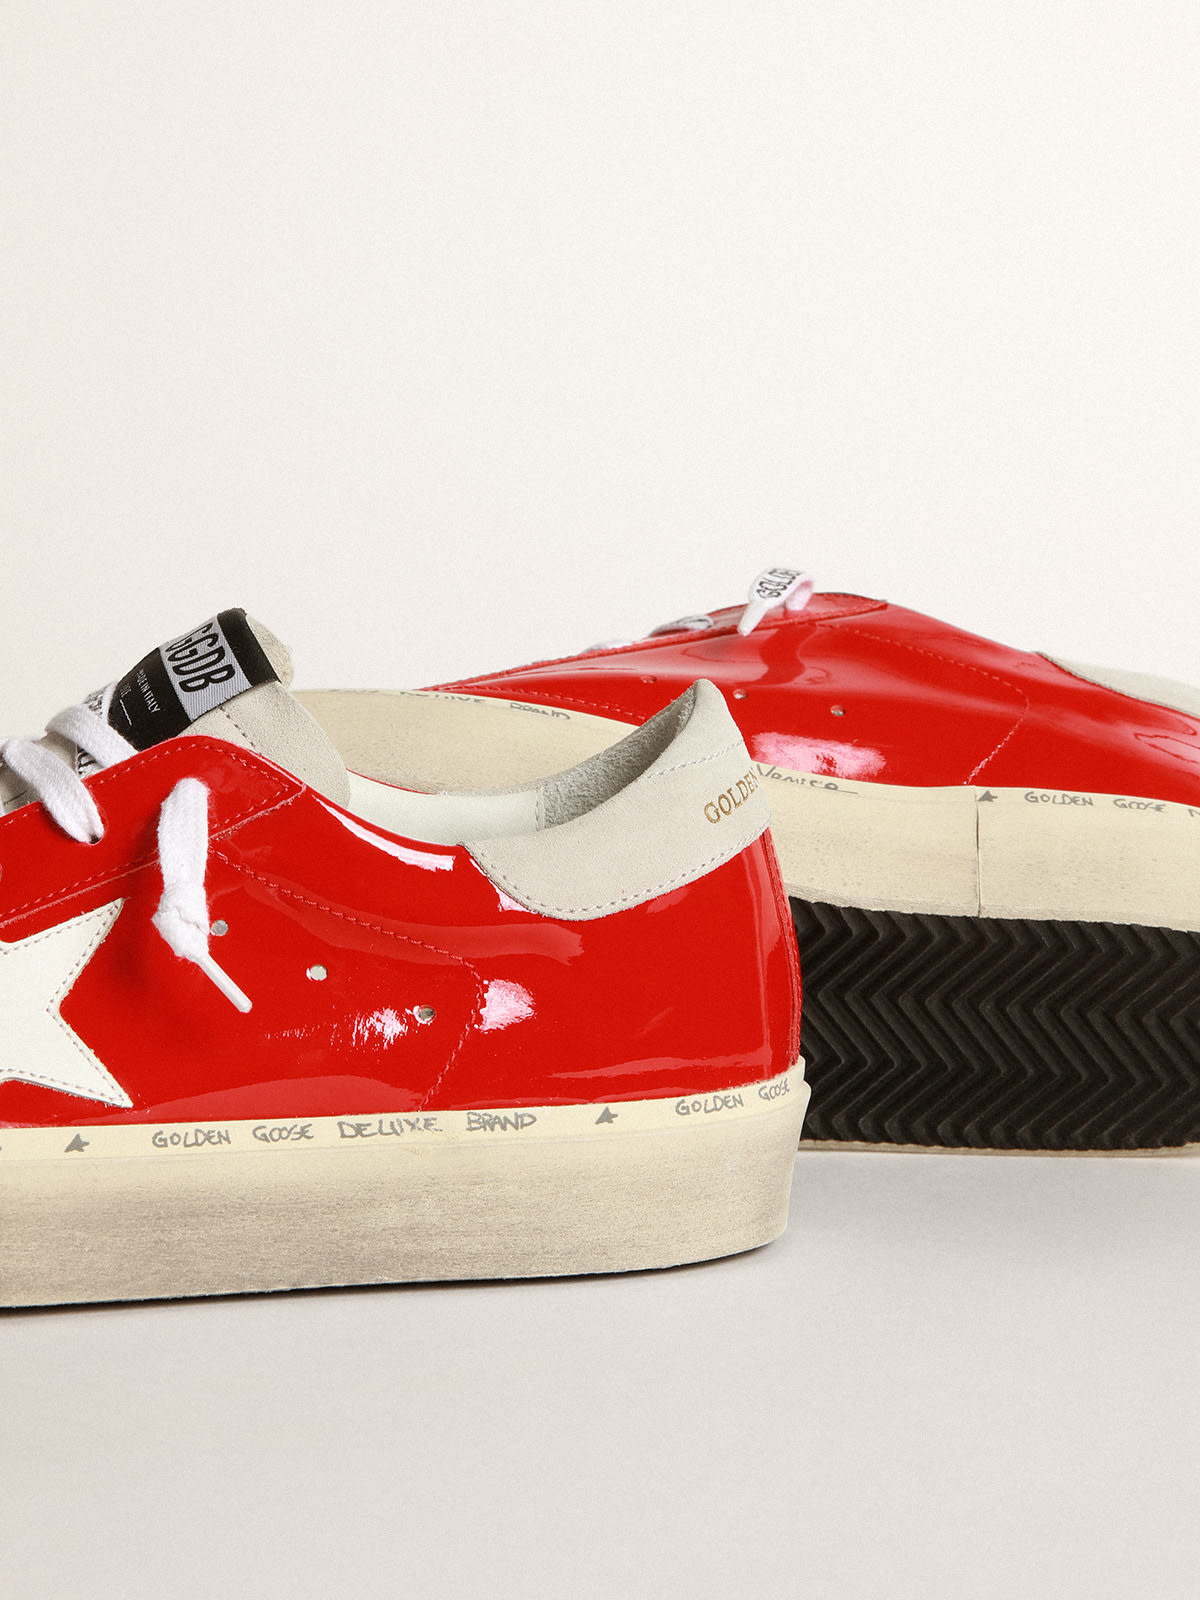 Golden Goose - Hi Star sneakers in red patent leather with white leather star and off-white suede heel tab in 